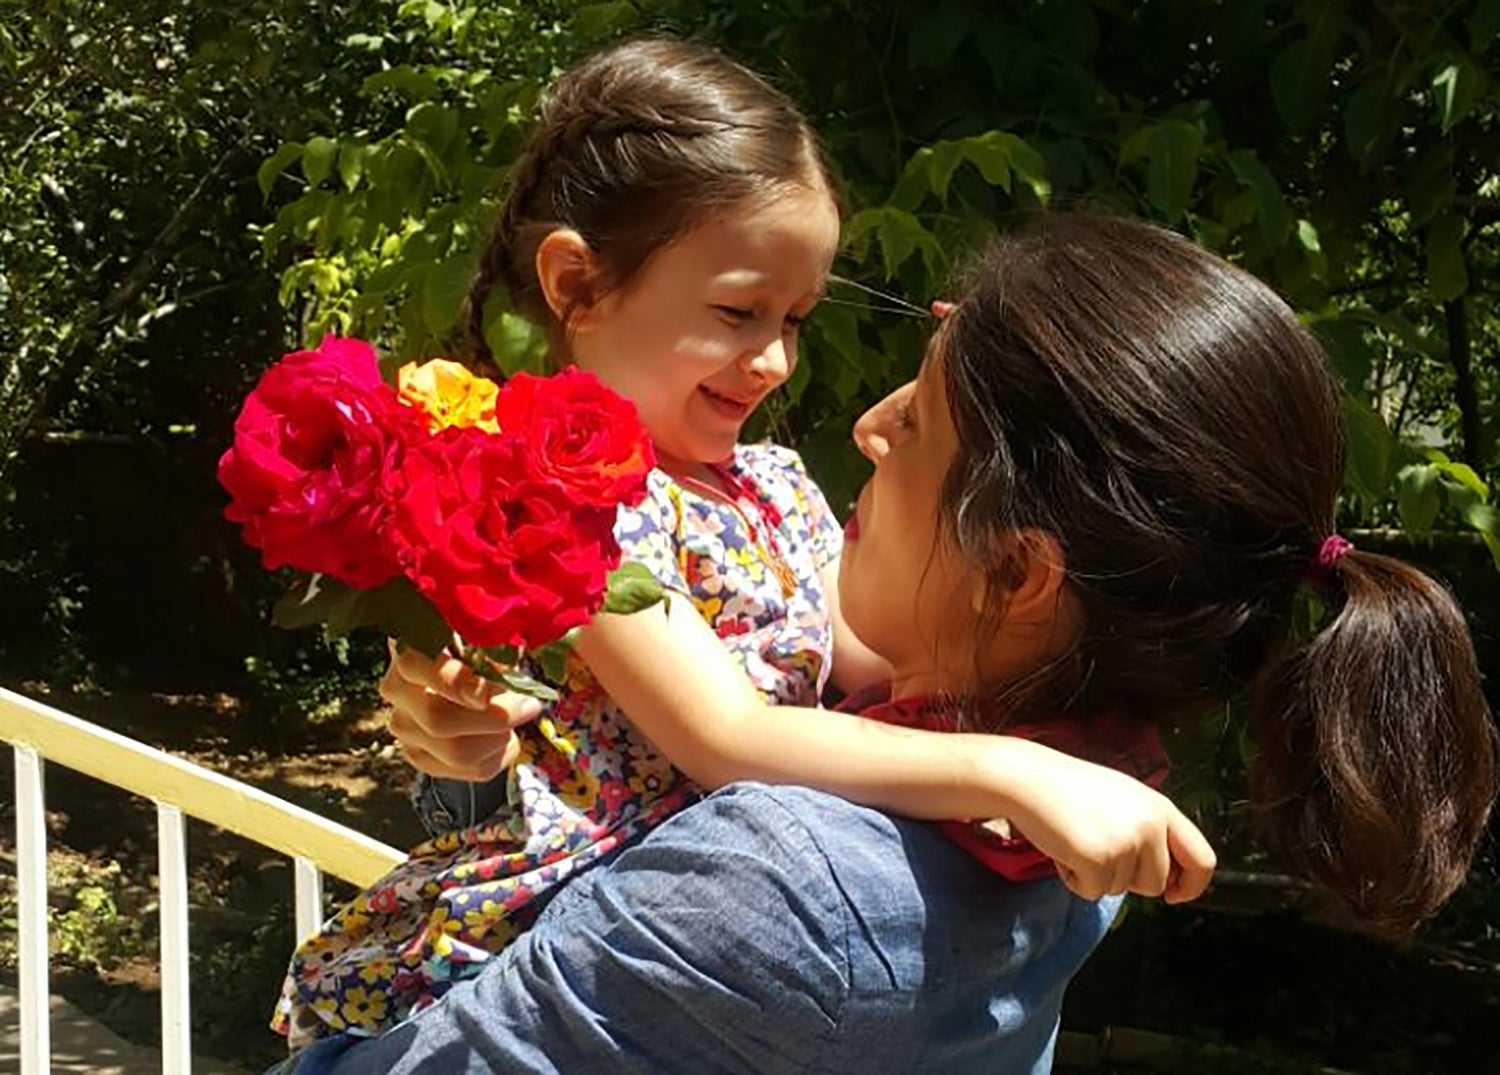 Nazanin Zaghari-Ratcliffe has been separated from her family for almost two years